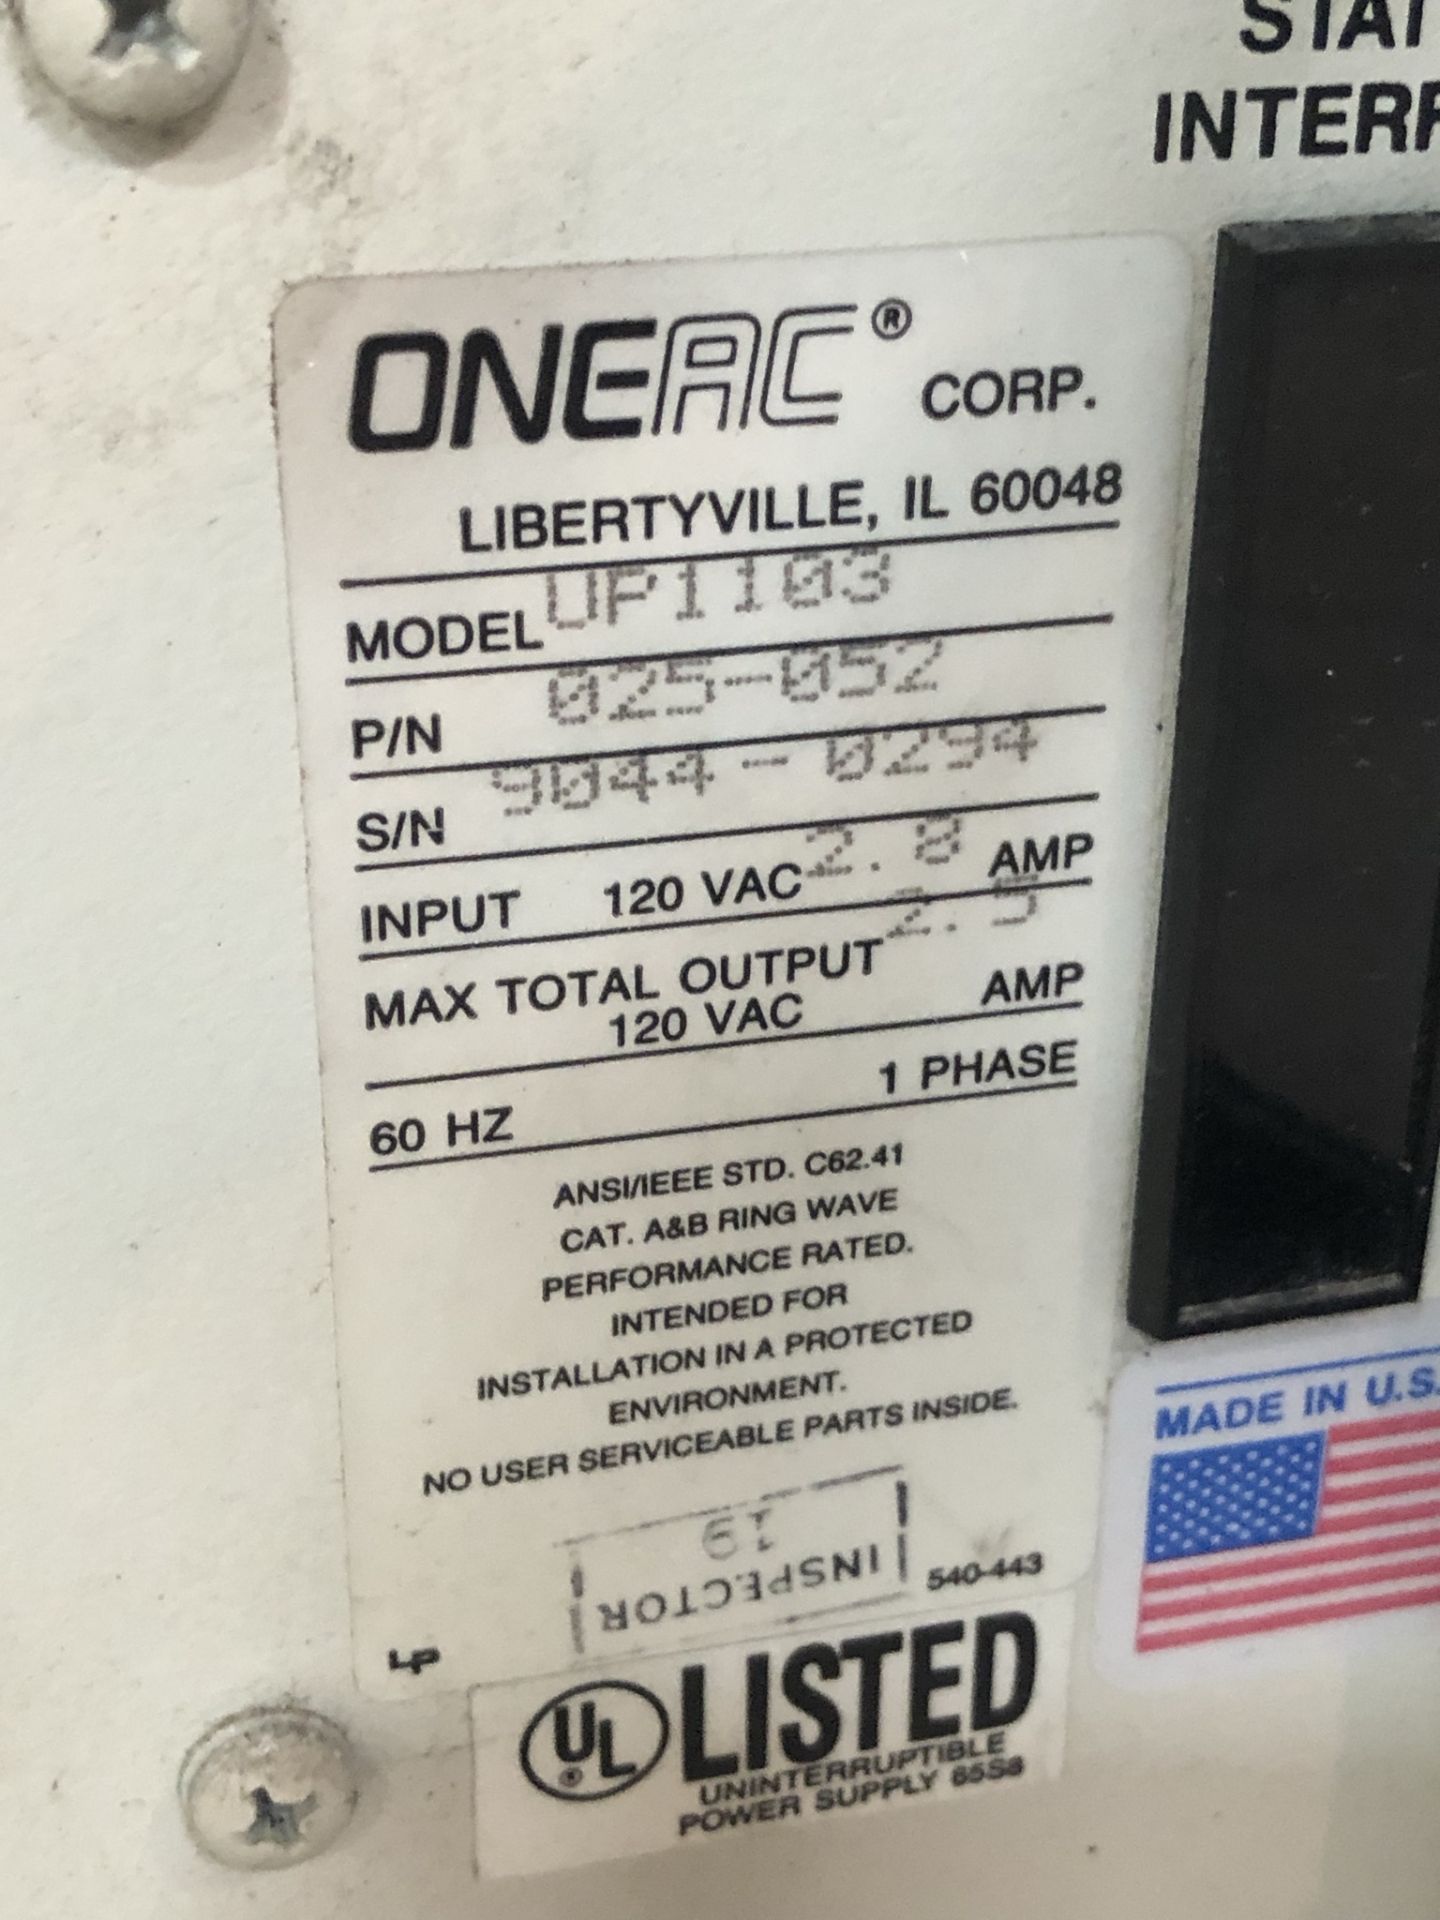 Oneac Corp., Quantity 10, Model UP1103, Uninterruptable Power Supplies (see detail PDF) - Image 3 of 11